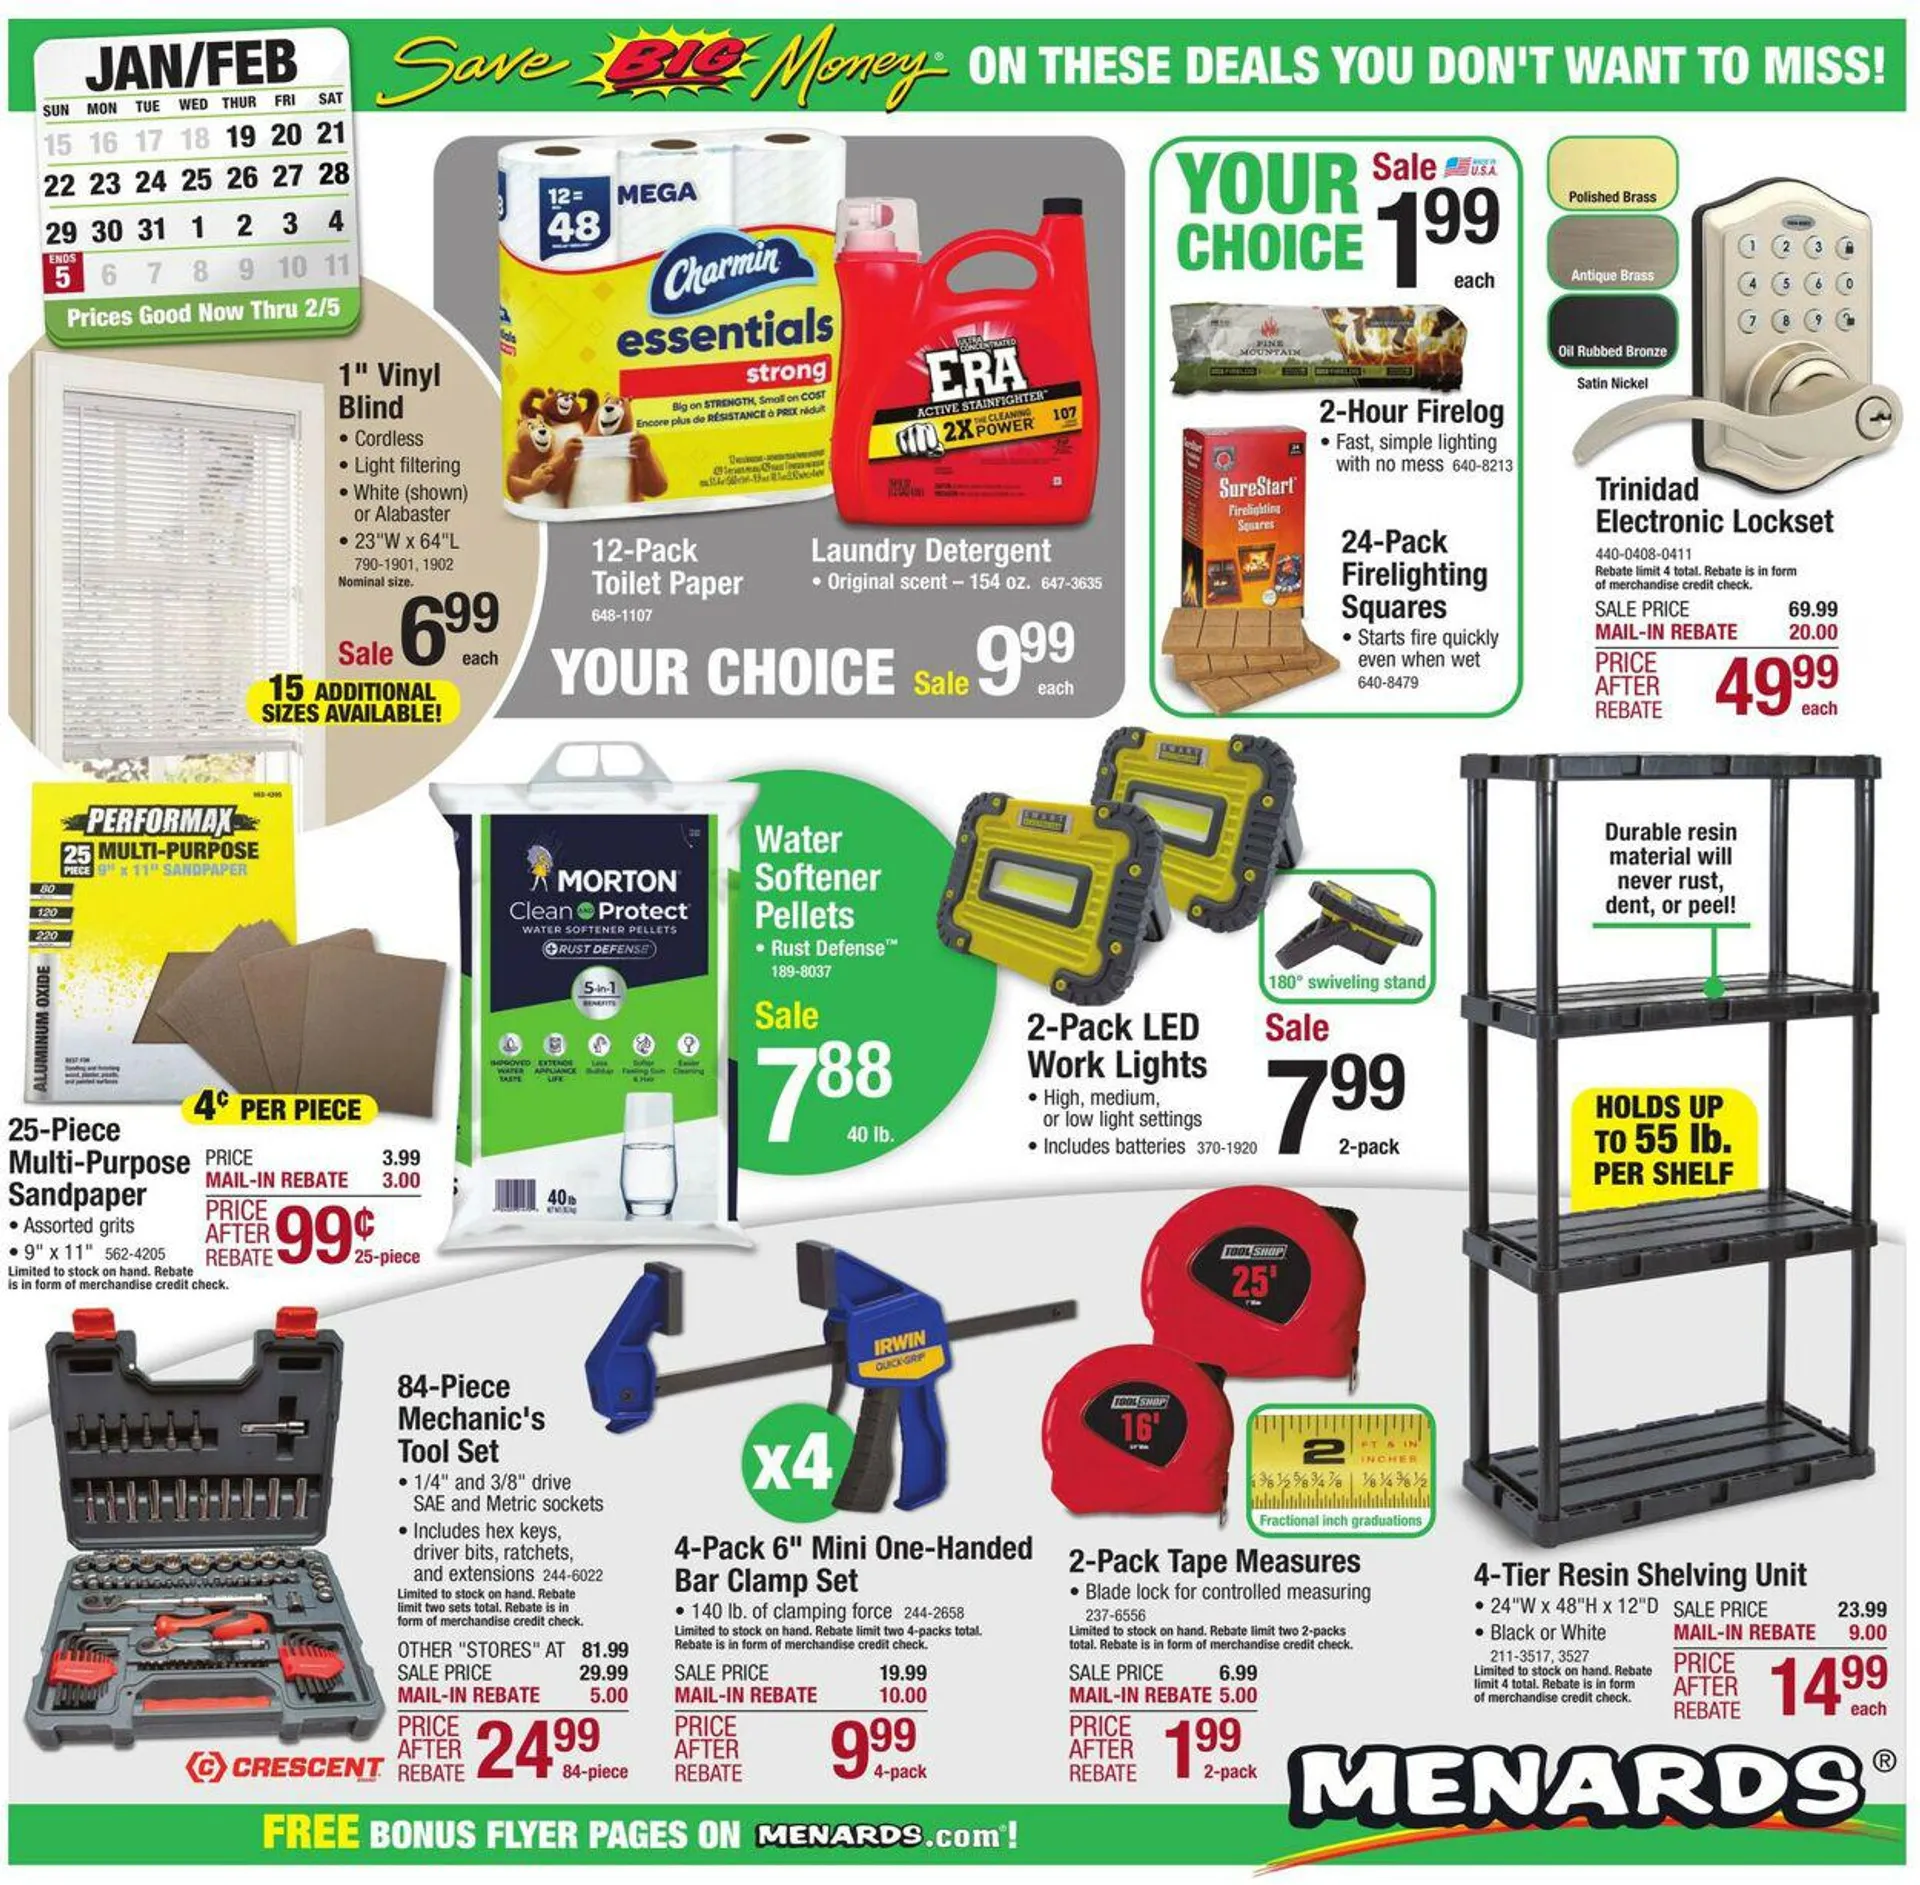 Menards Current weekly ad - 1